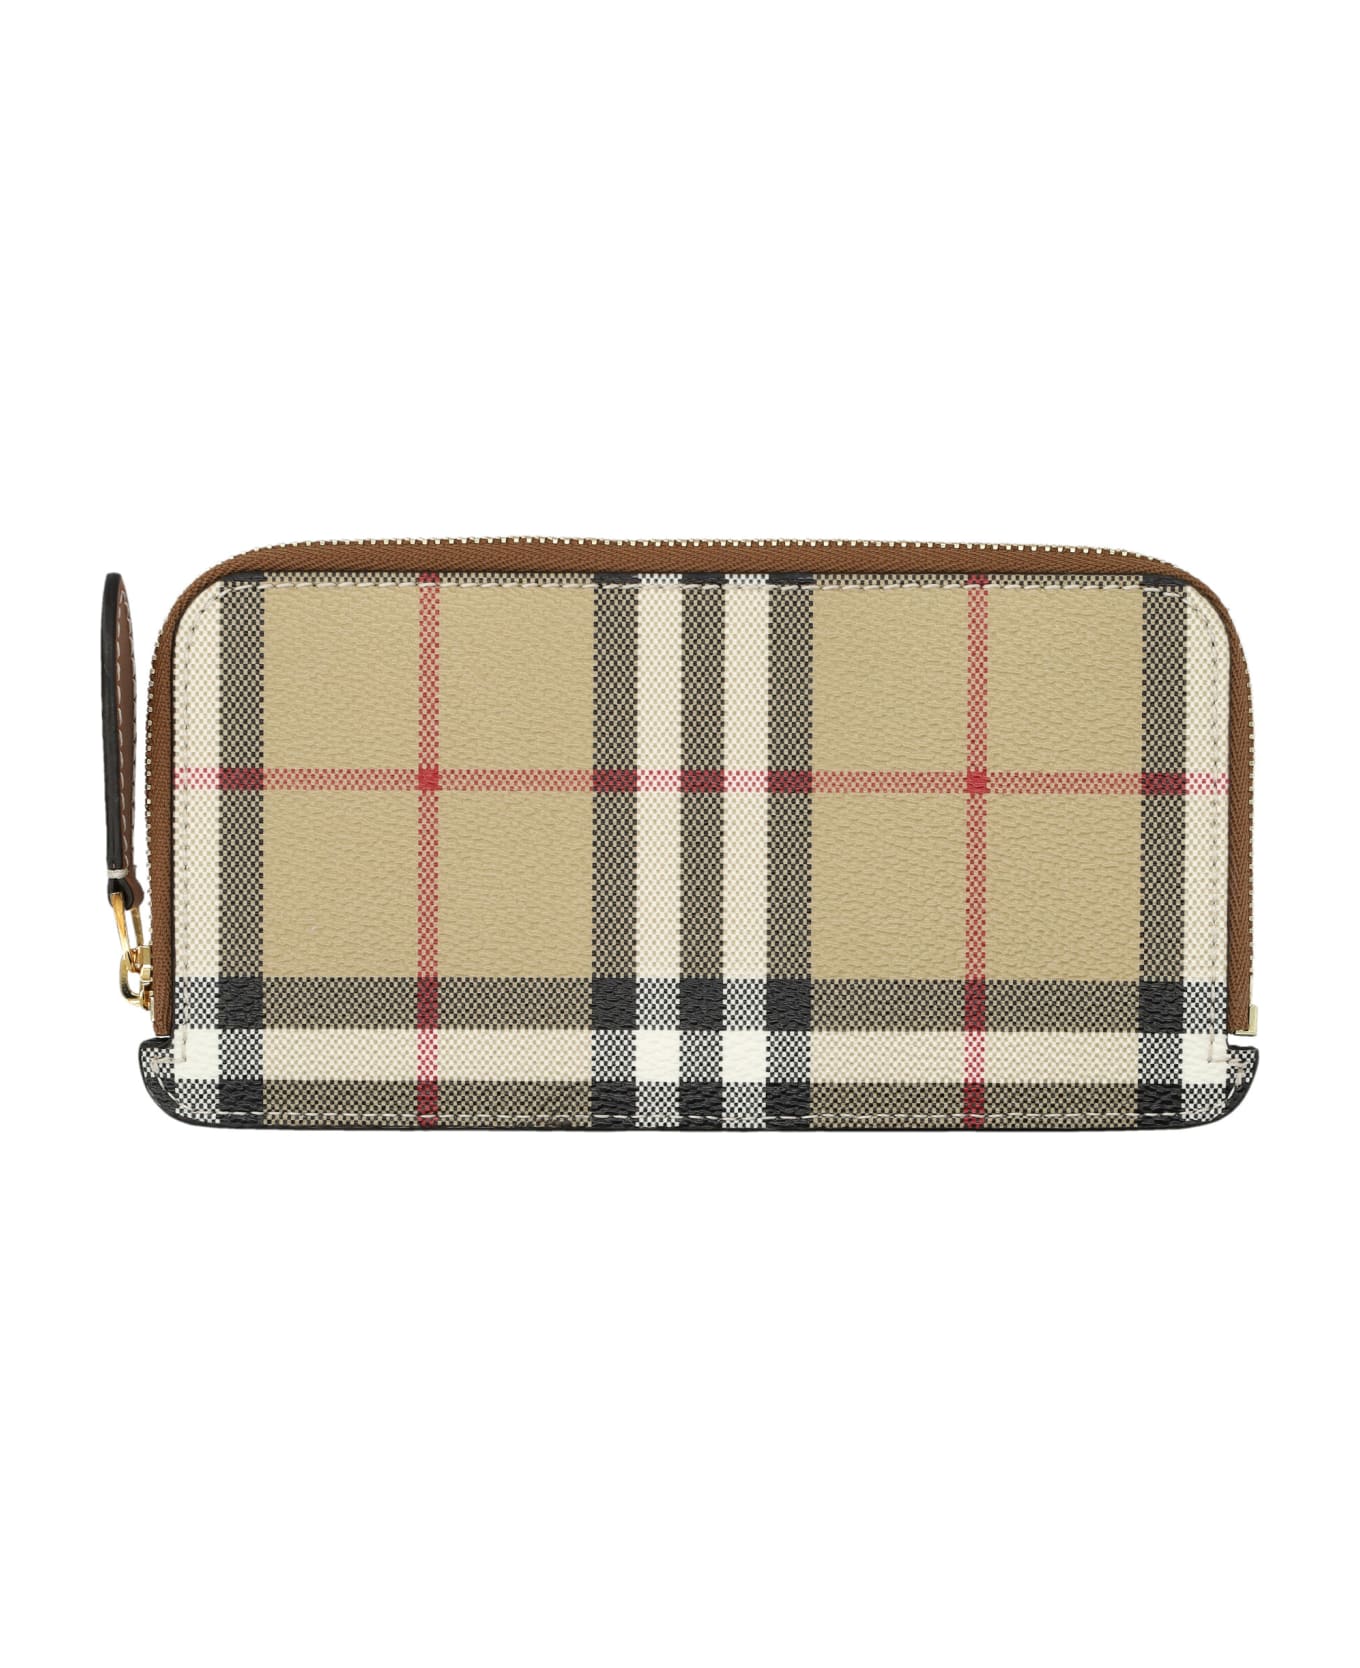 Burberry London Long Somerset Wallet - ARCHIVE BEIGE CHECK 財布